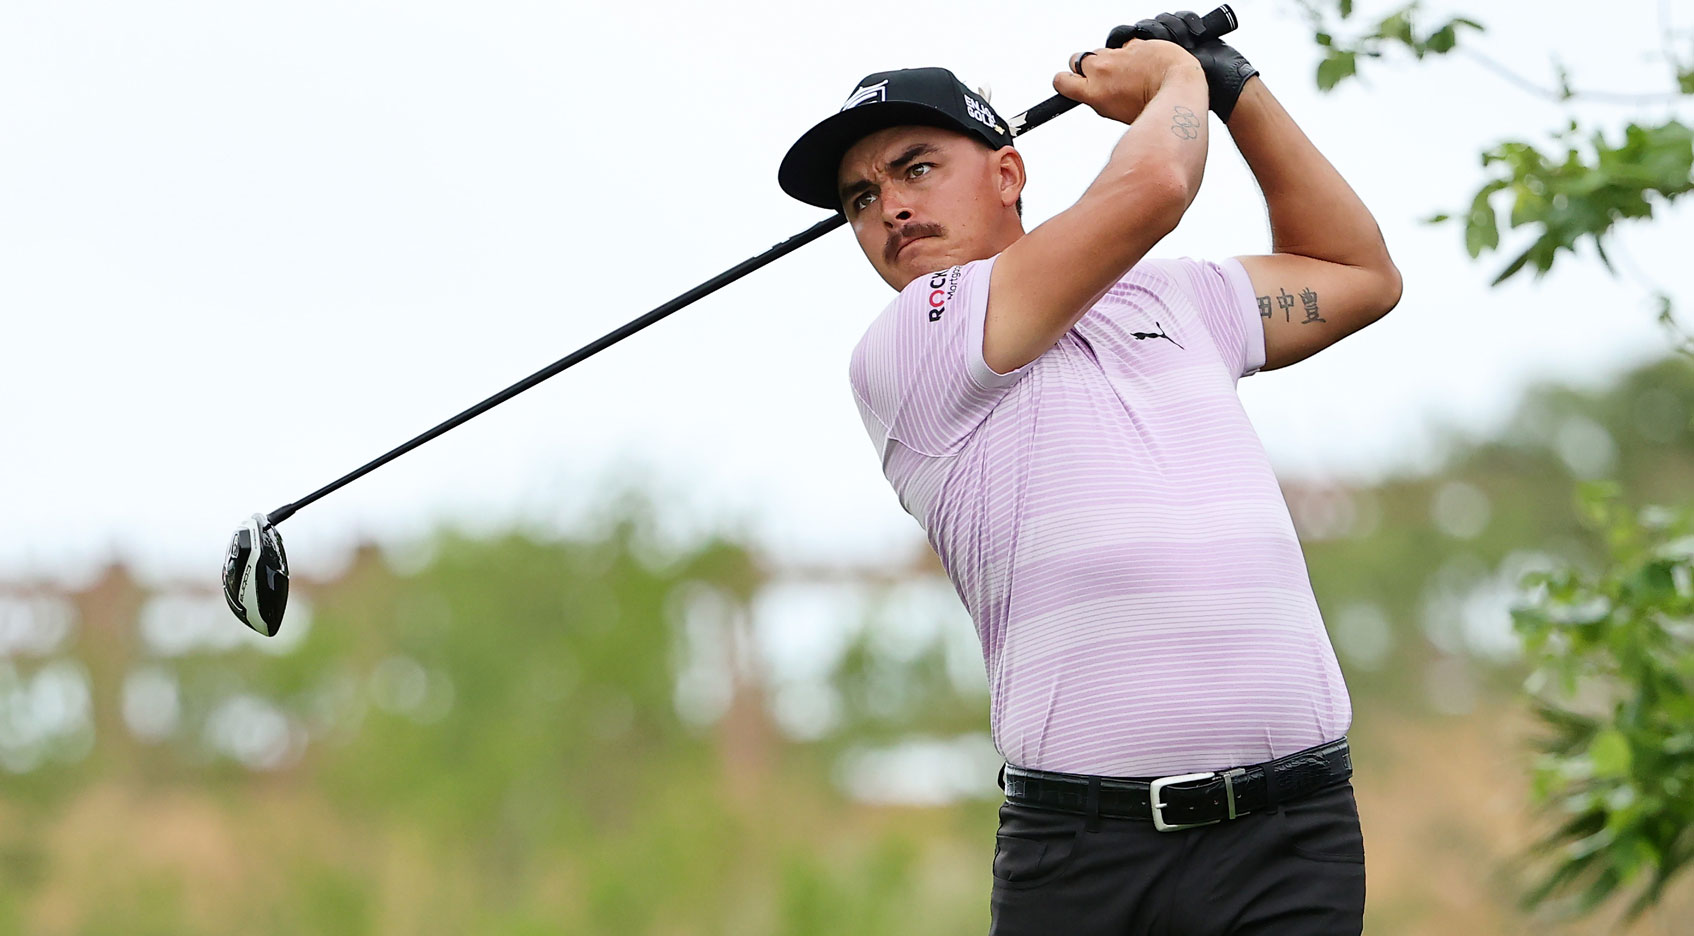 Rickie Fowler rebounds from quadruple-bogey to card 70